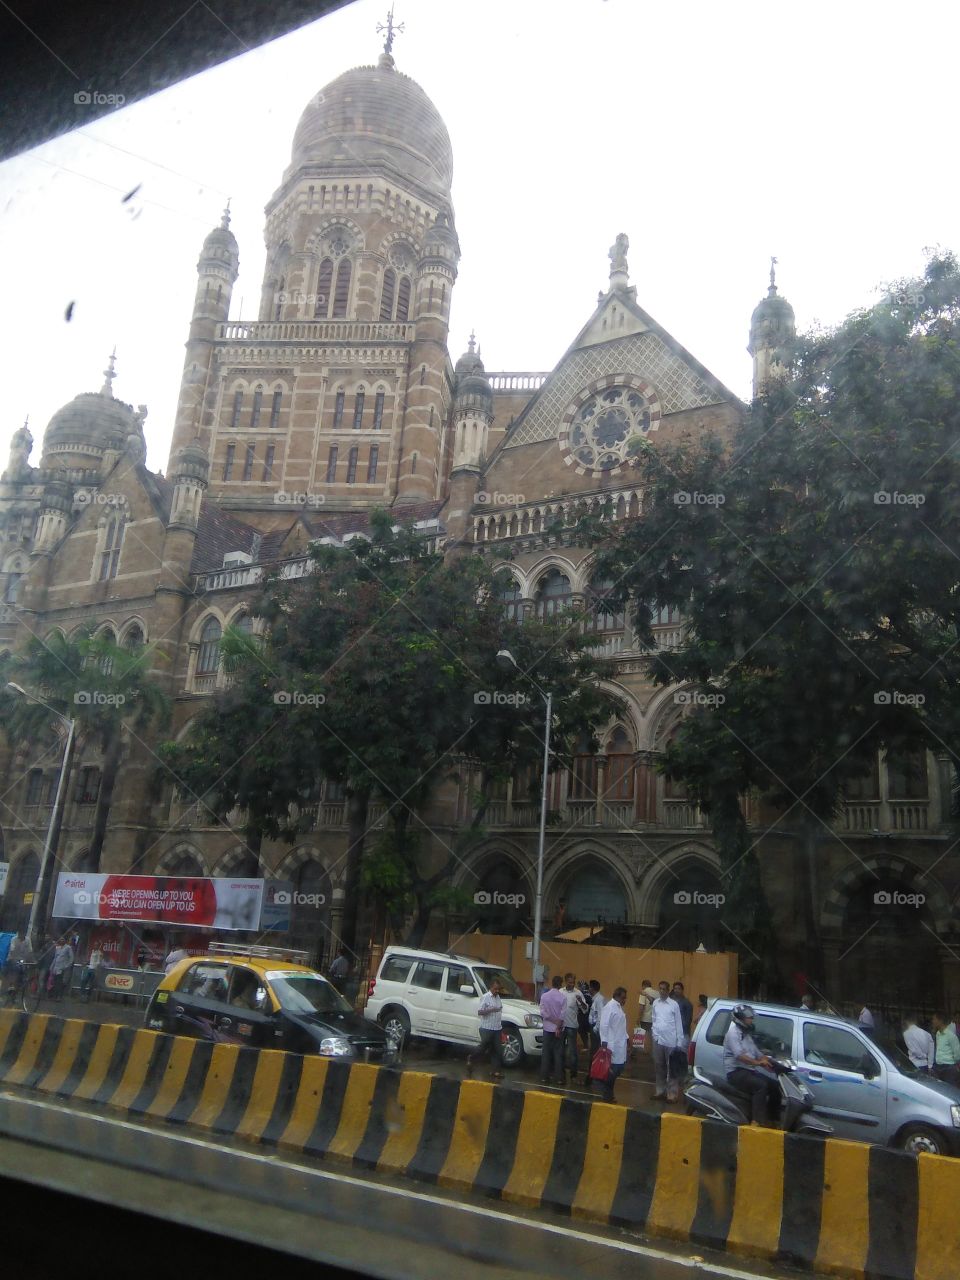 this building is stay Mumbai city.